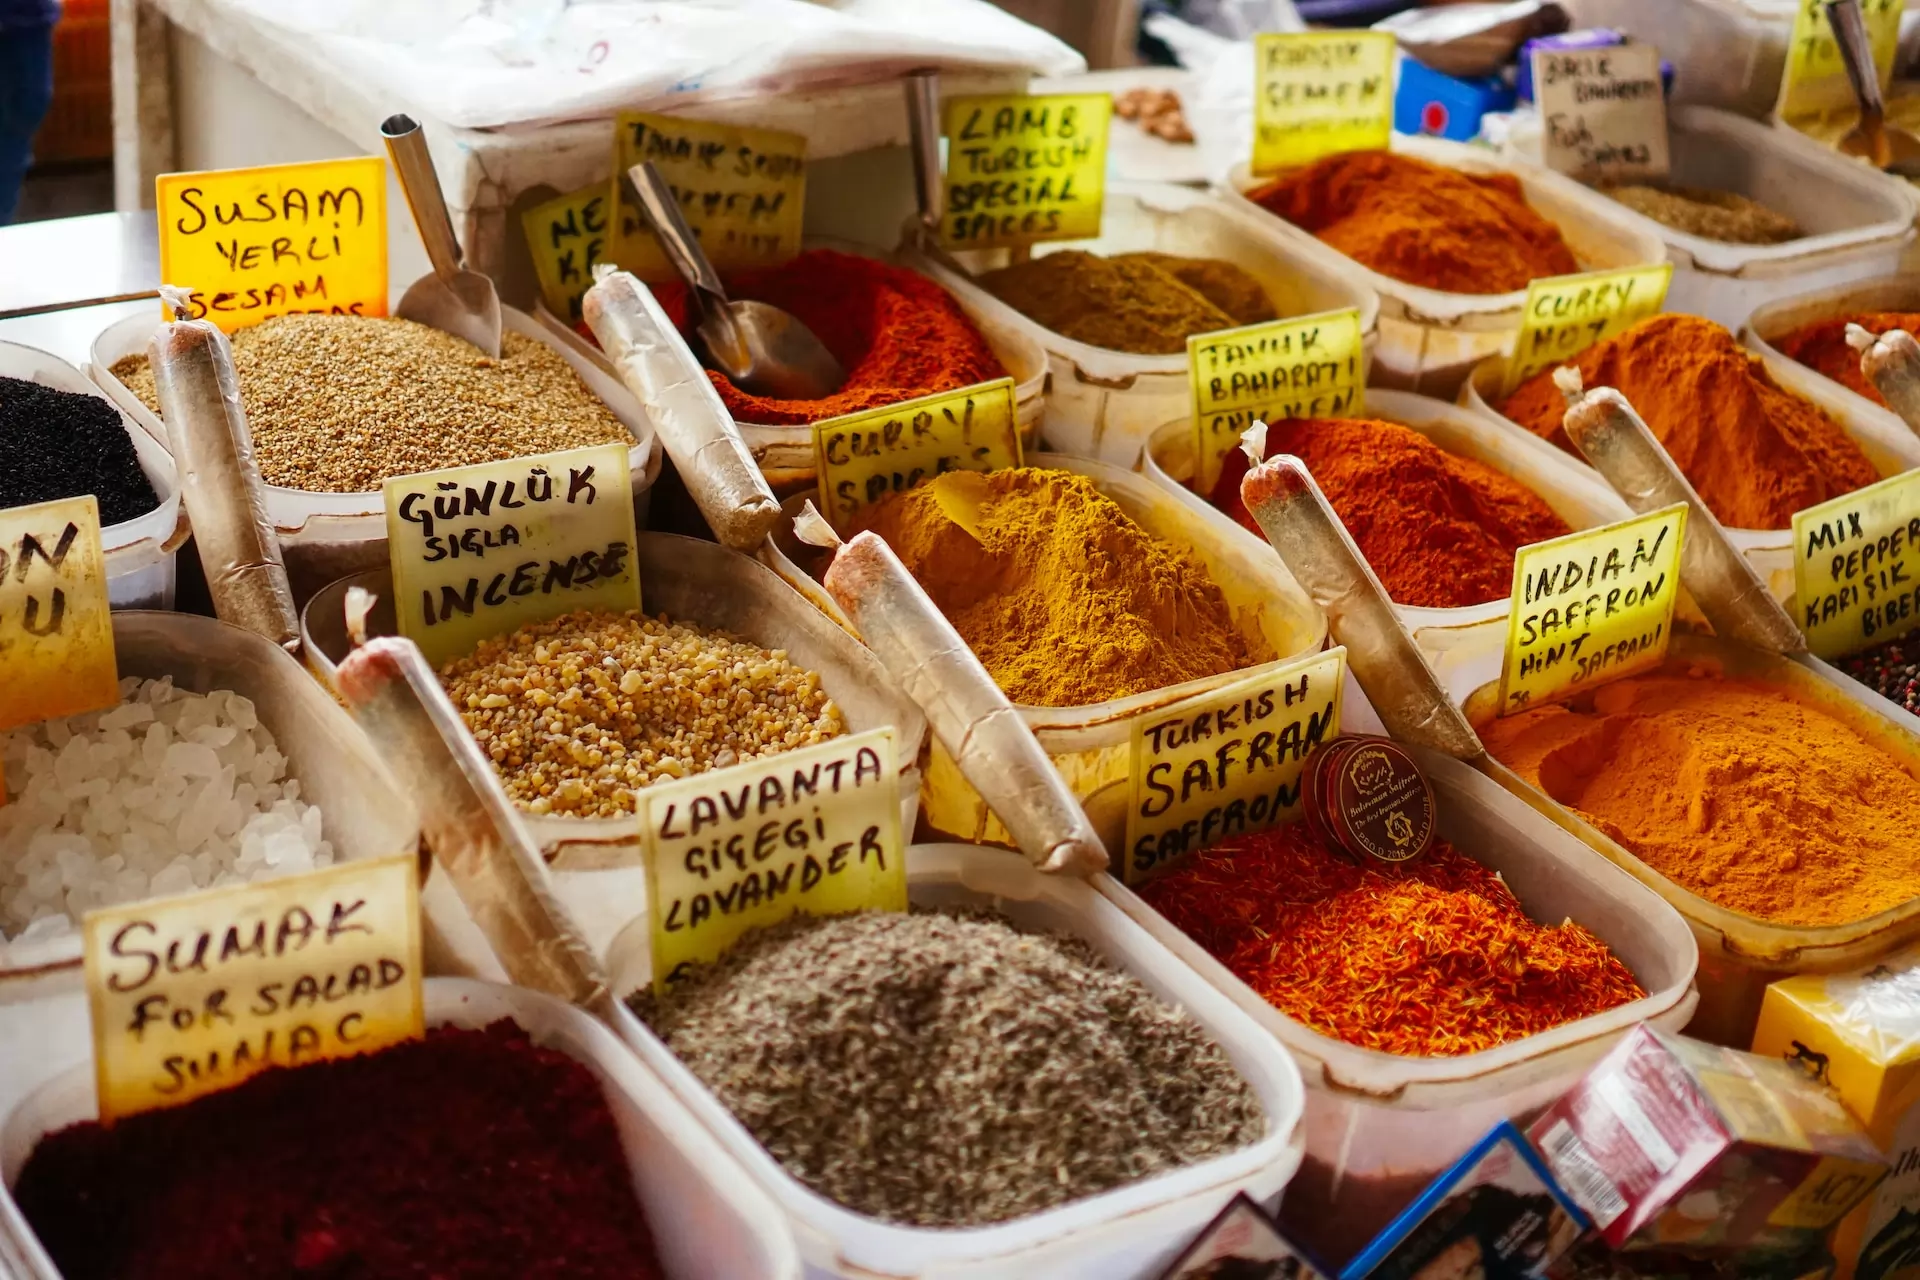 The food flavouring market